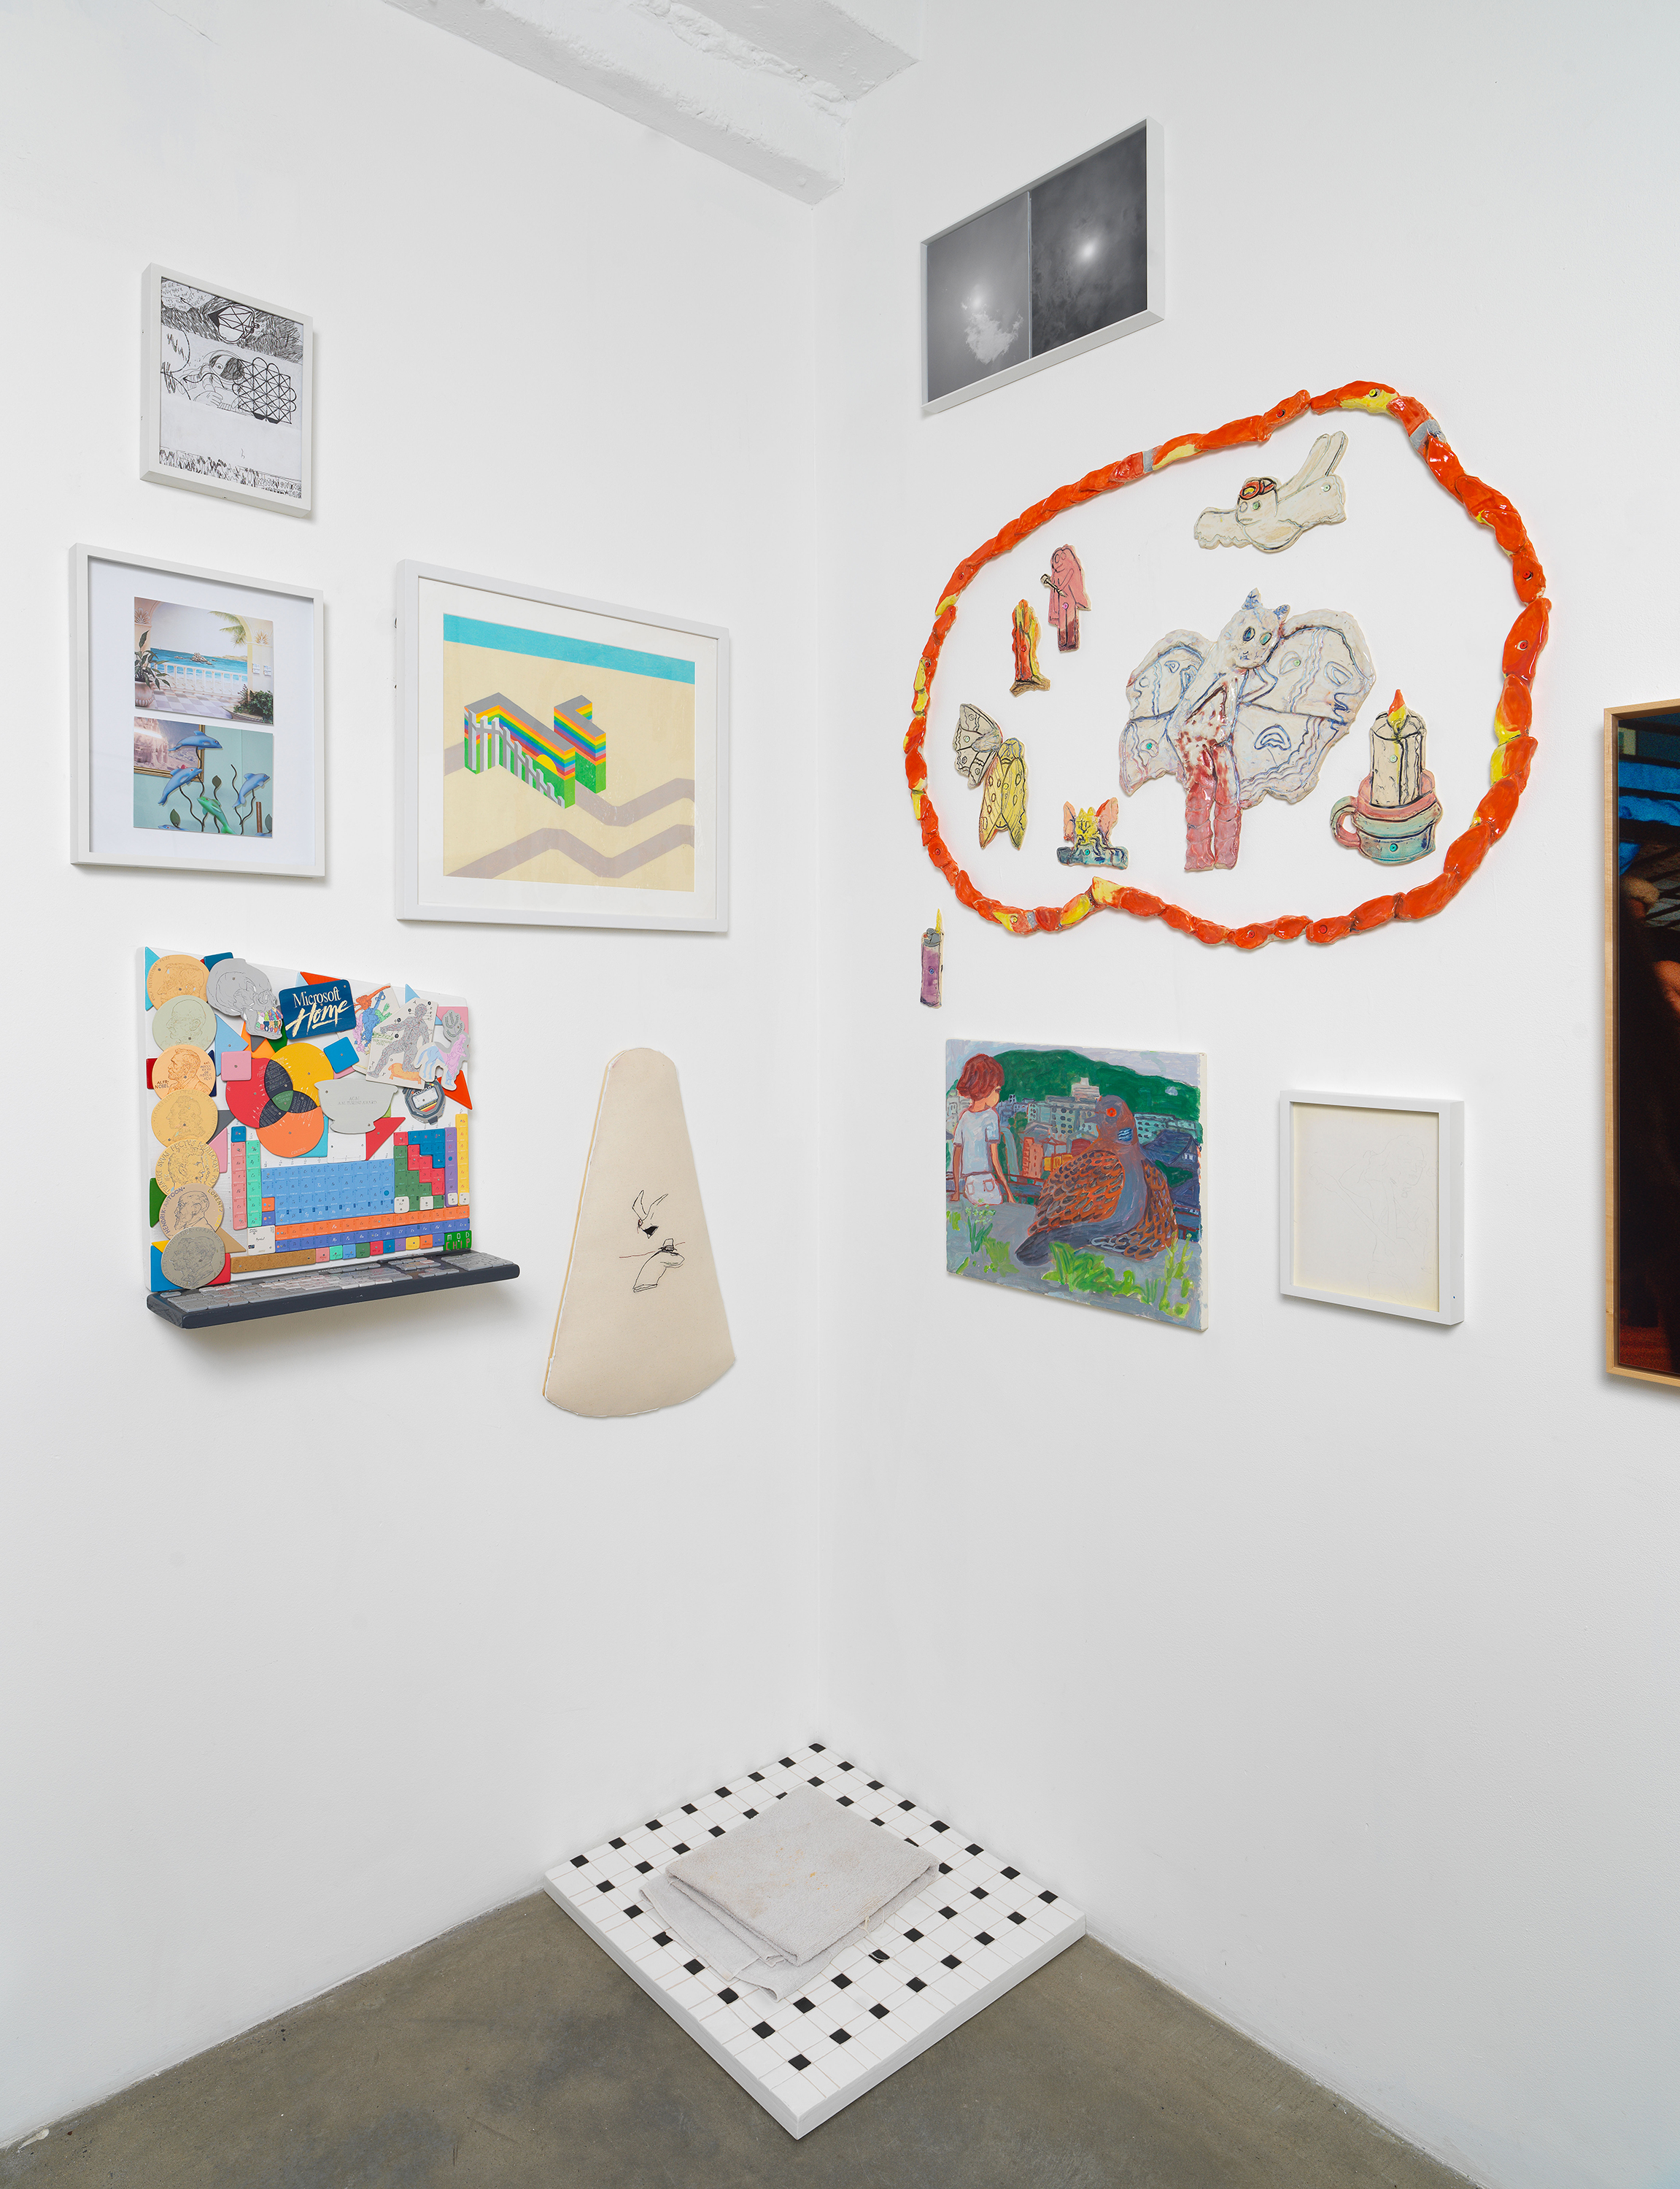 Installation view of 'Can You Dream It' featuring salon-style hanging of multimedia works by various artists and floor sculpture